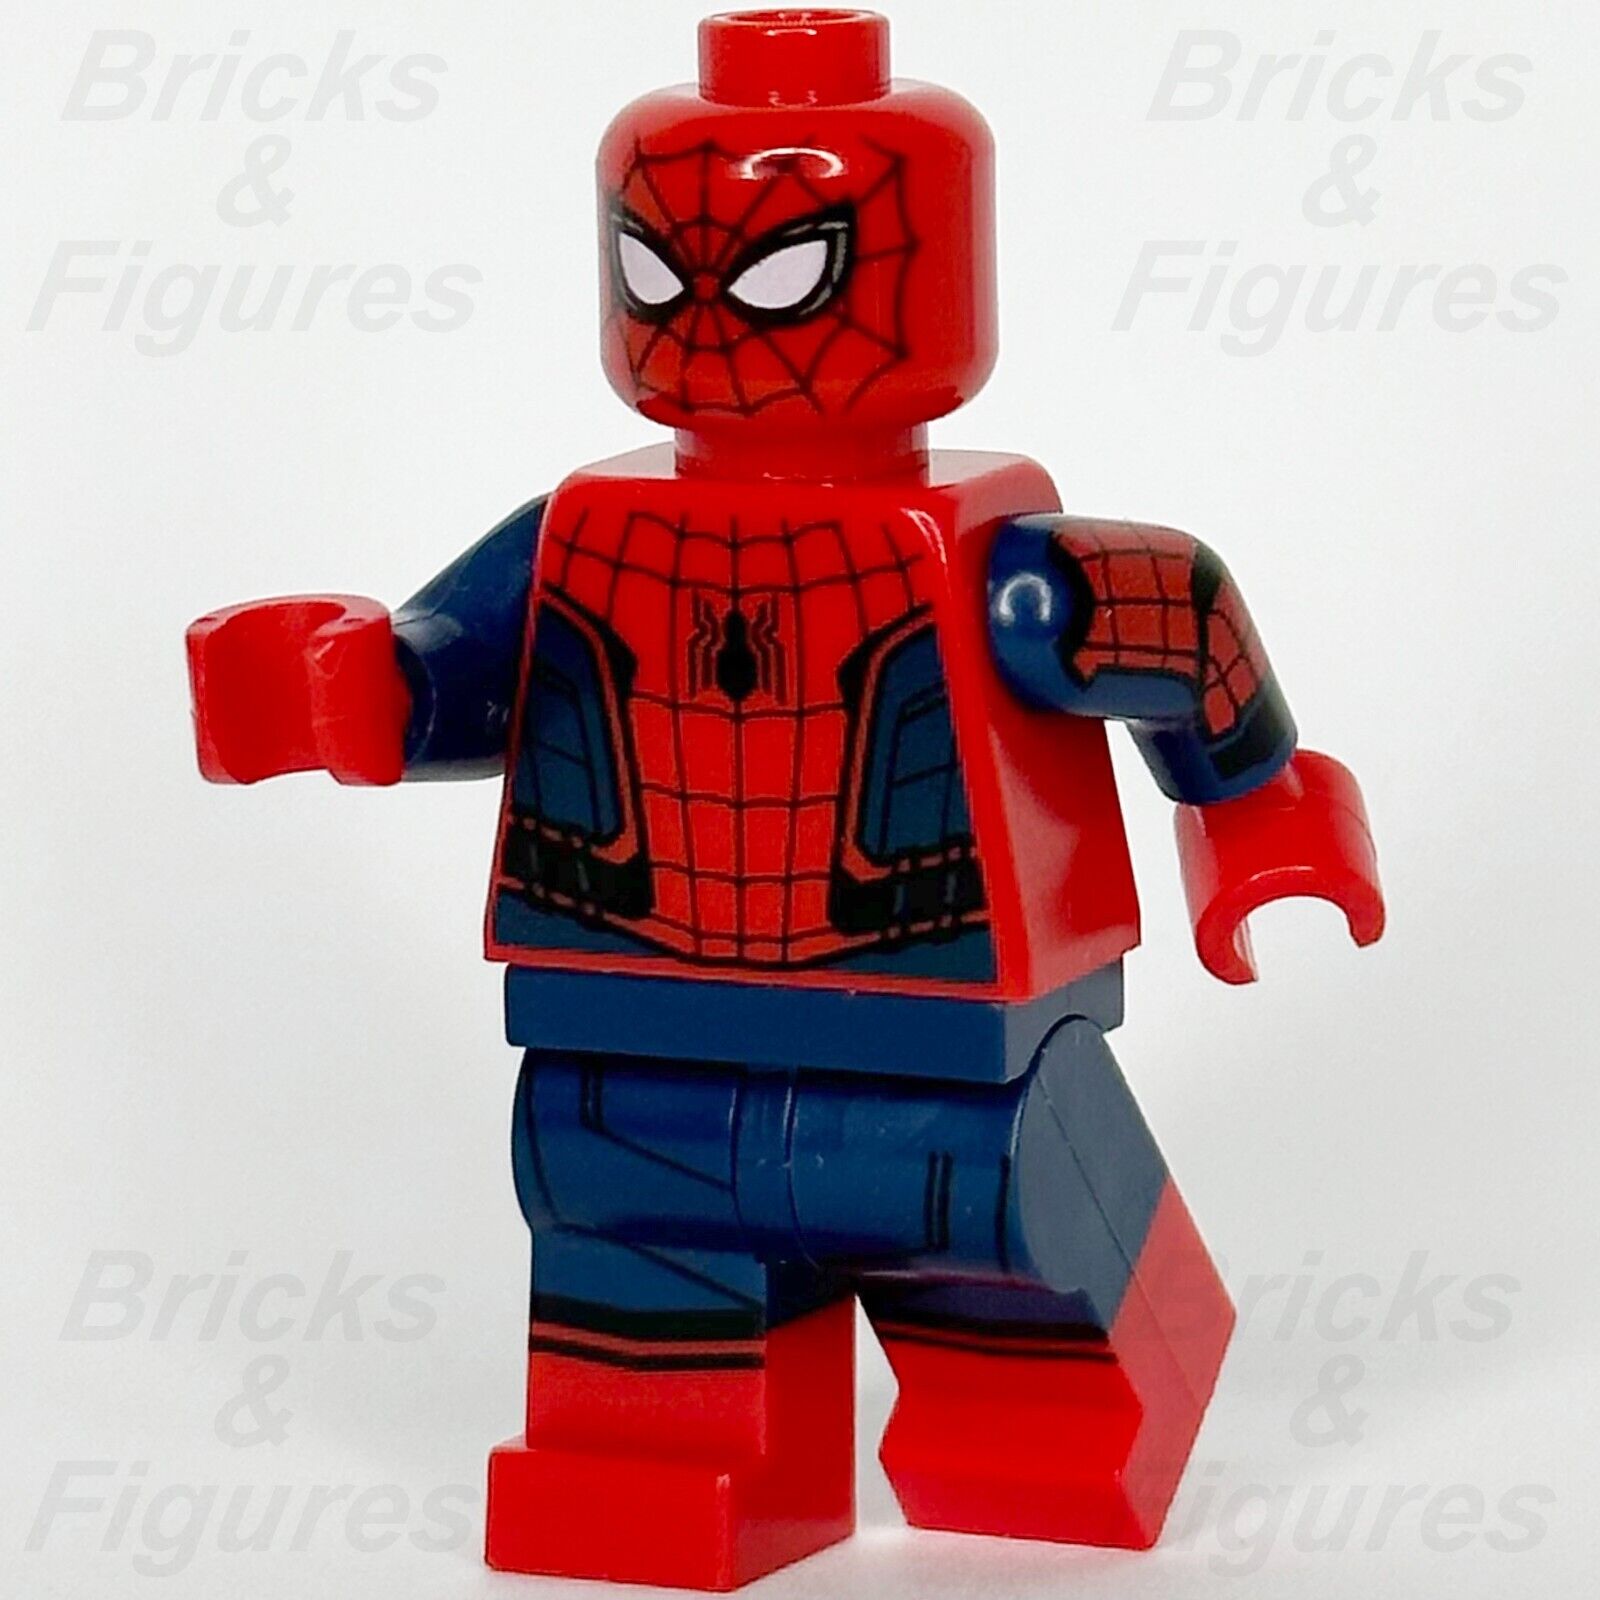 LEGO Super Heroes Spider-Man Minifigure Homecoming 76082 76083 76130 sh420